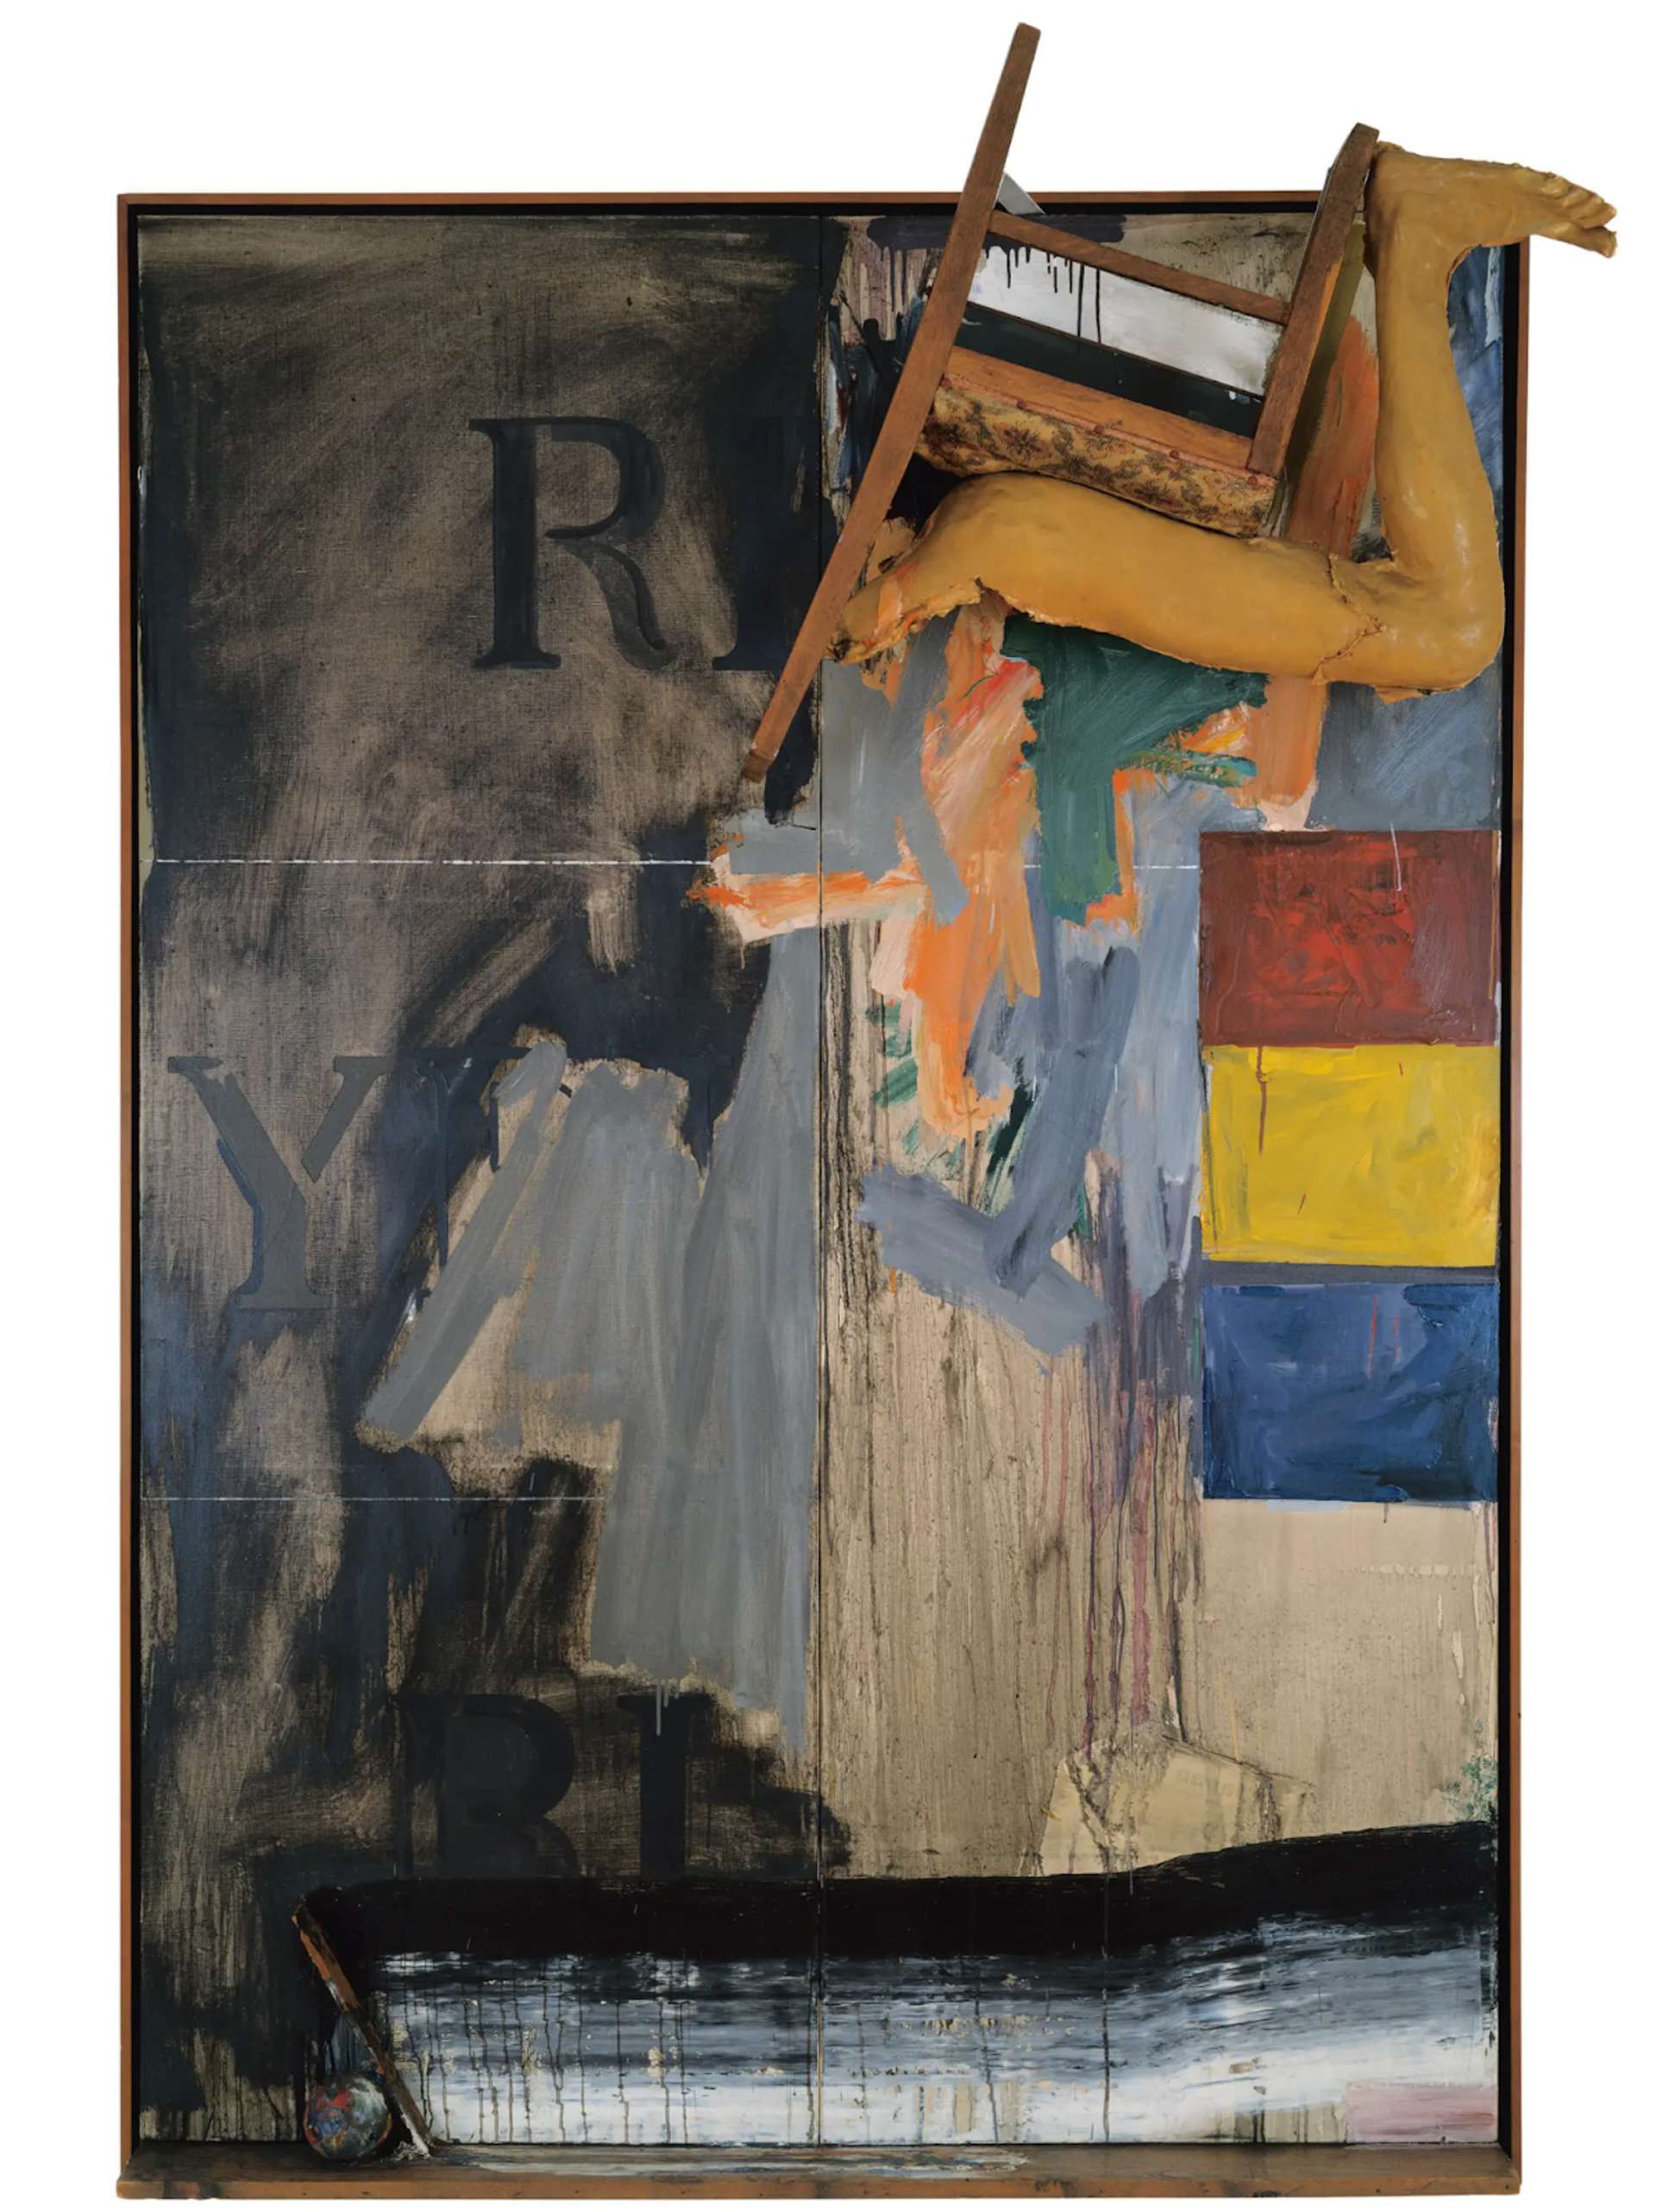 Jasper Johns’ Watchman. An abstract assemblage of mixed media including oil paint and found objects.